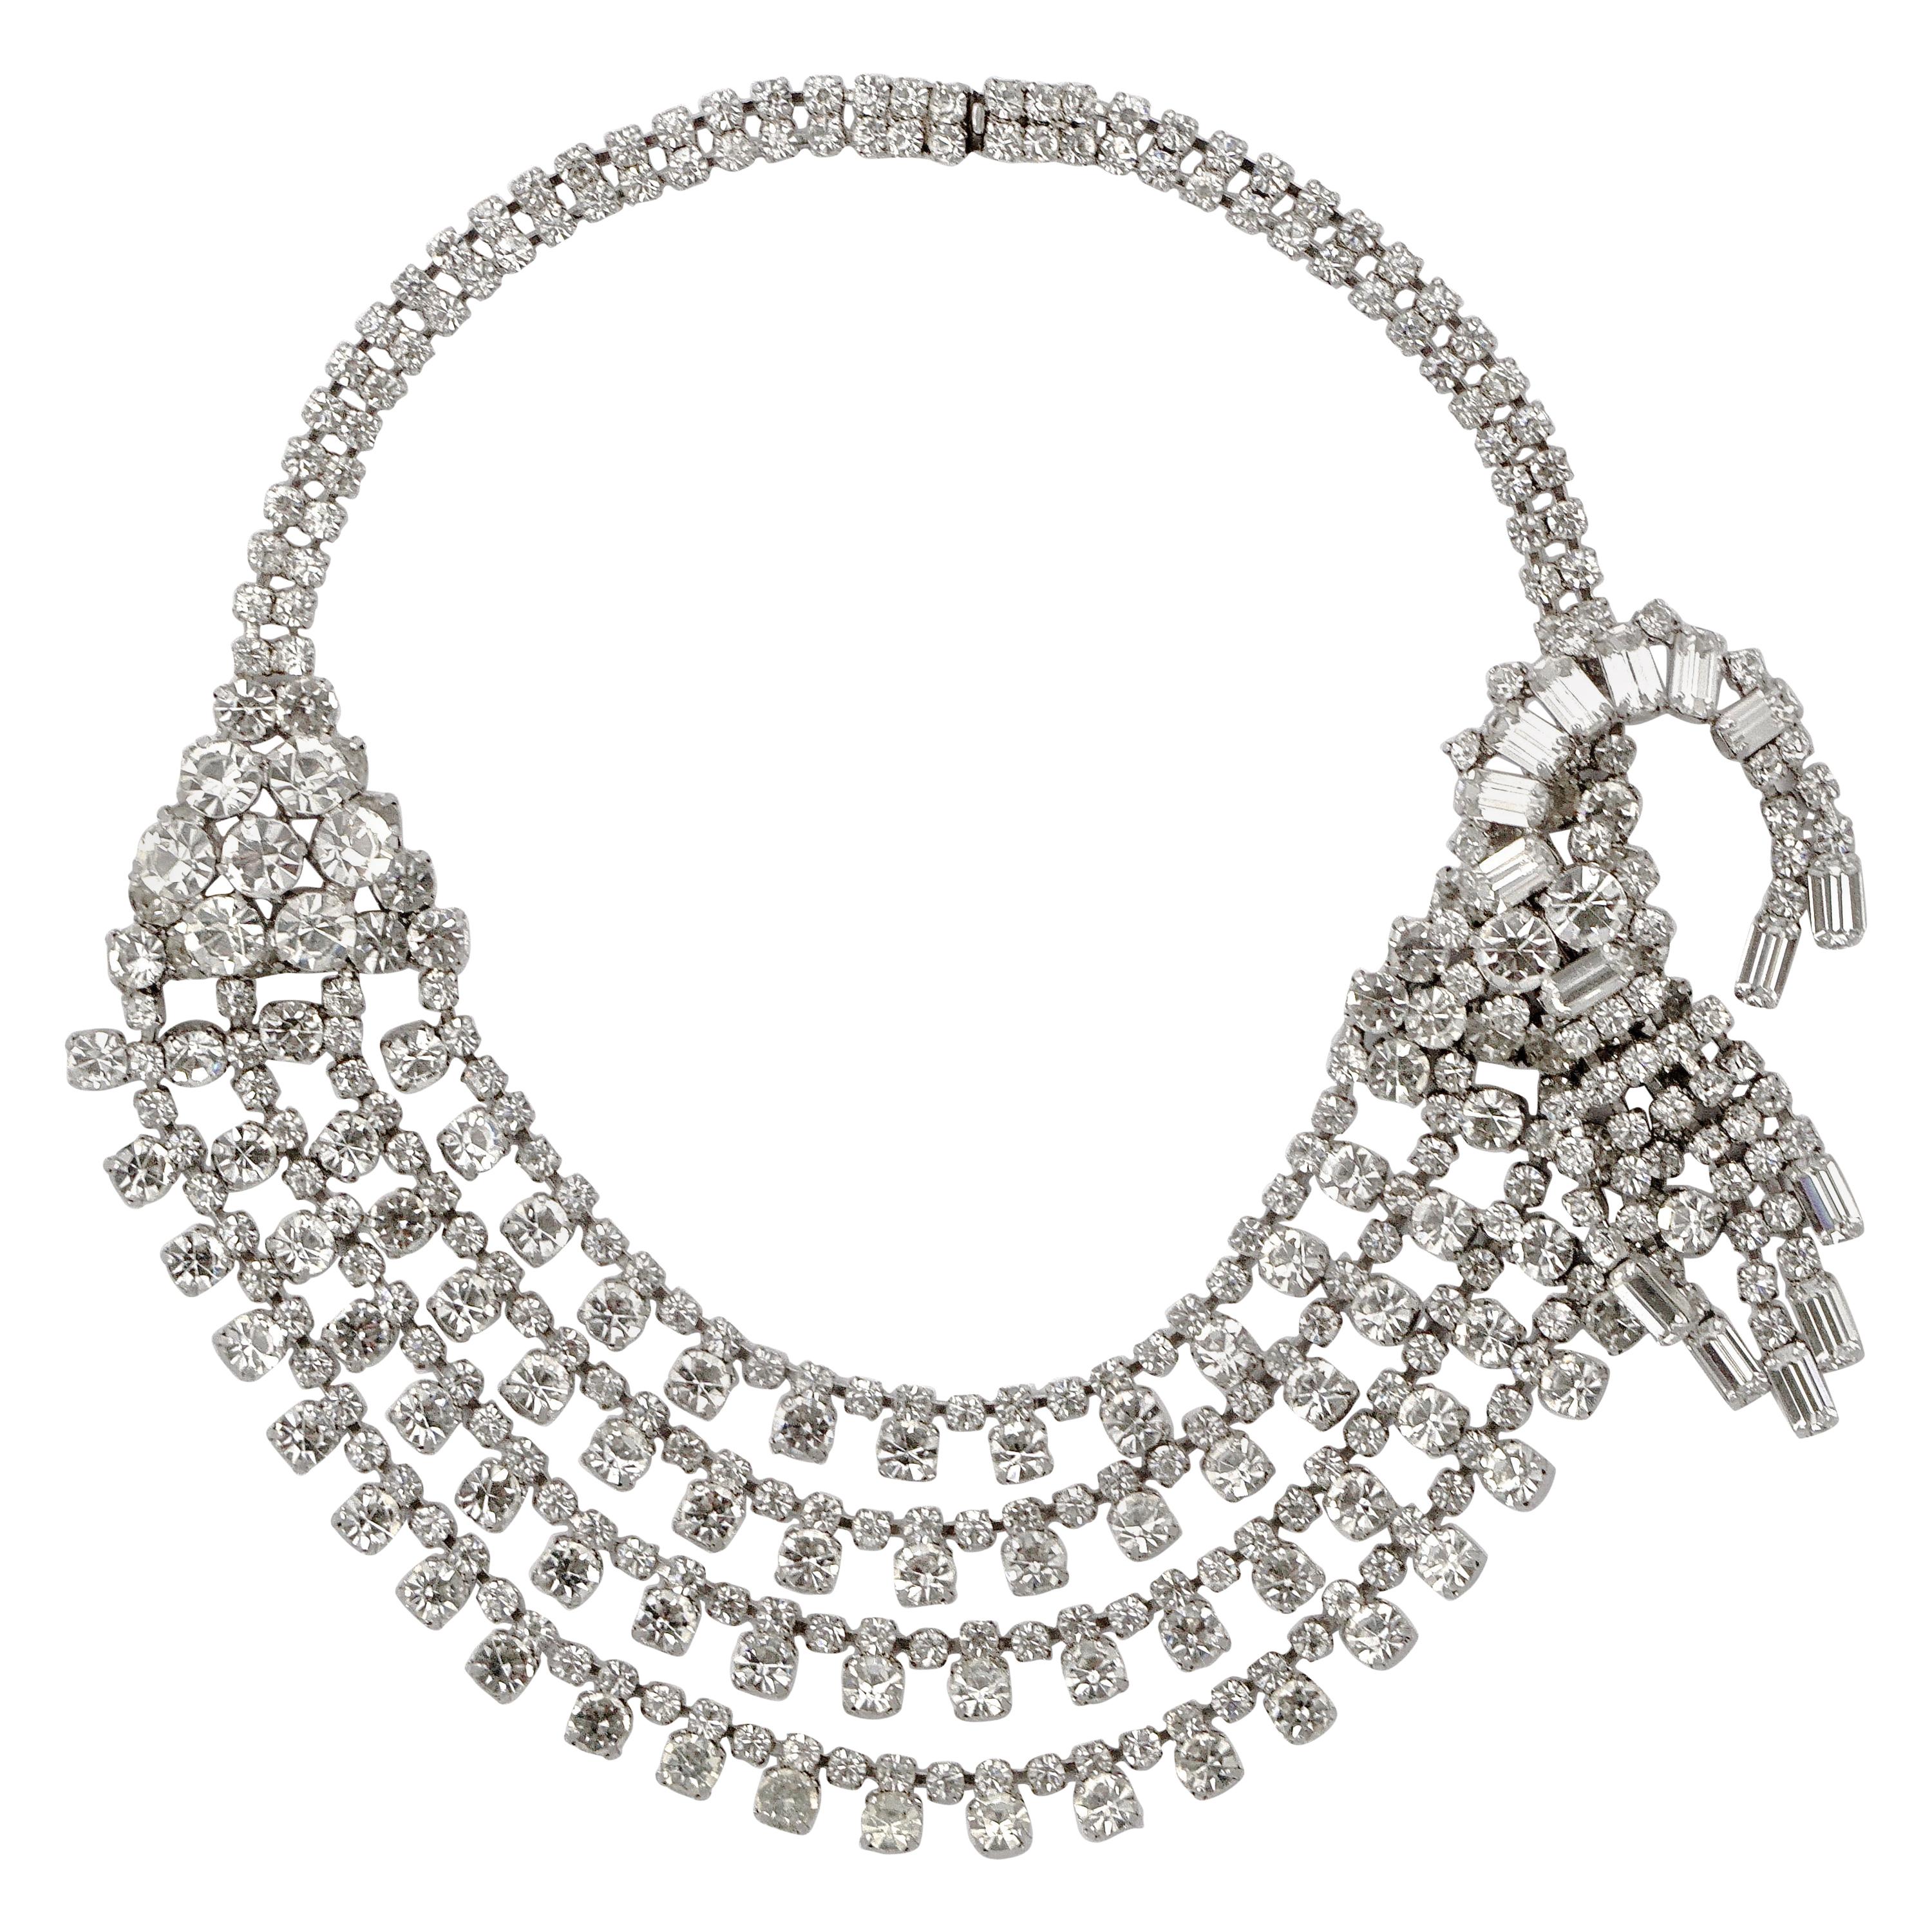 Silver Plated Four Strand Rhinestone Statement Collar Necklace circa 1950s For Sale